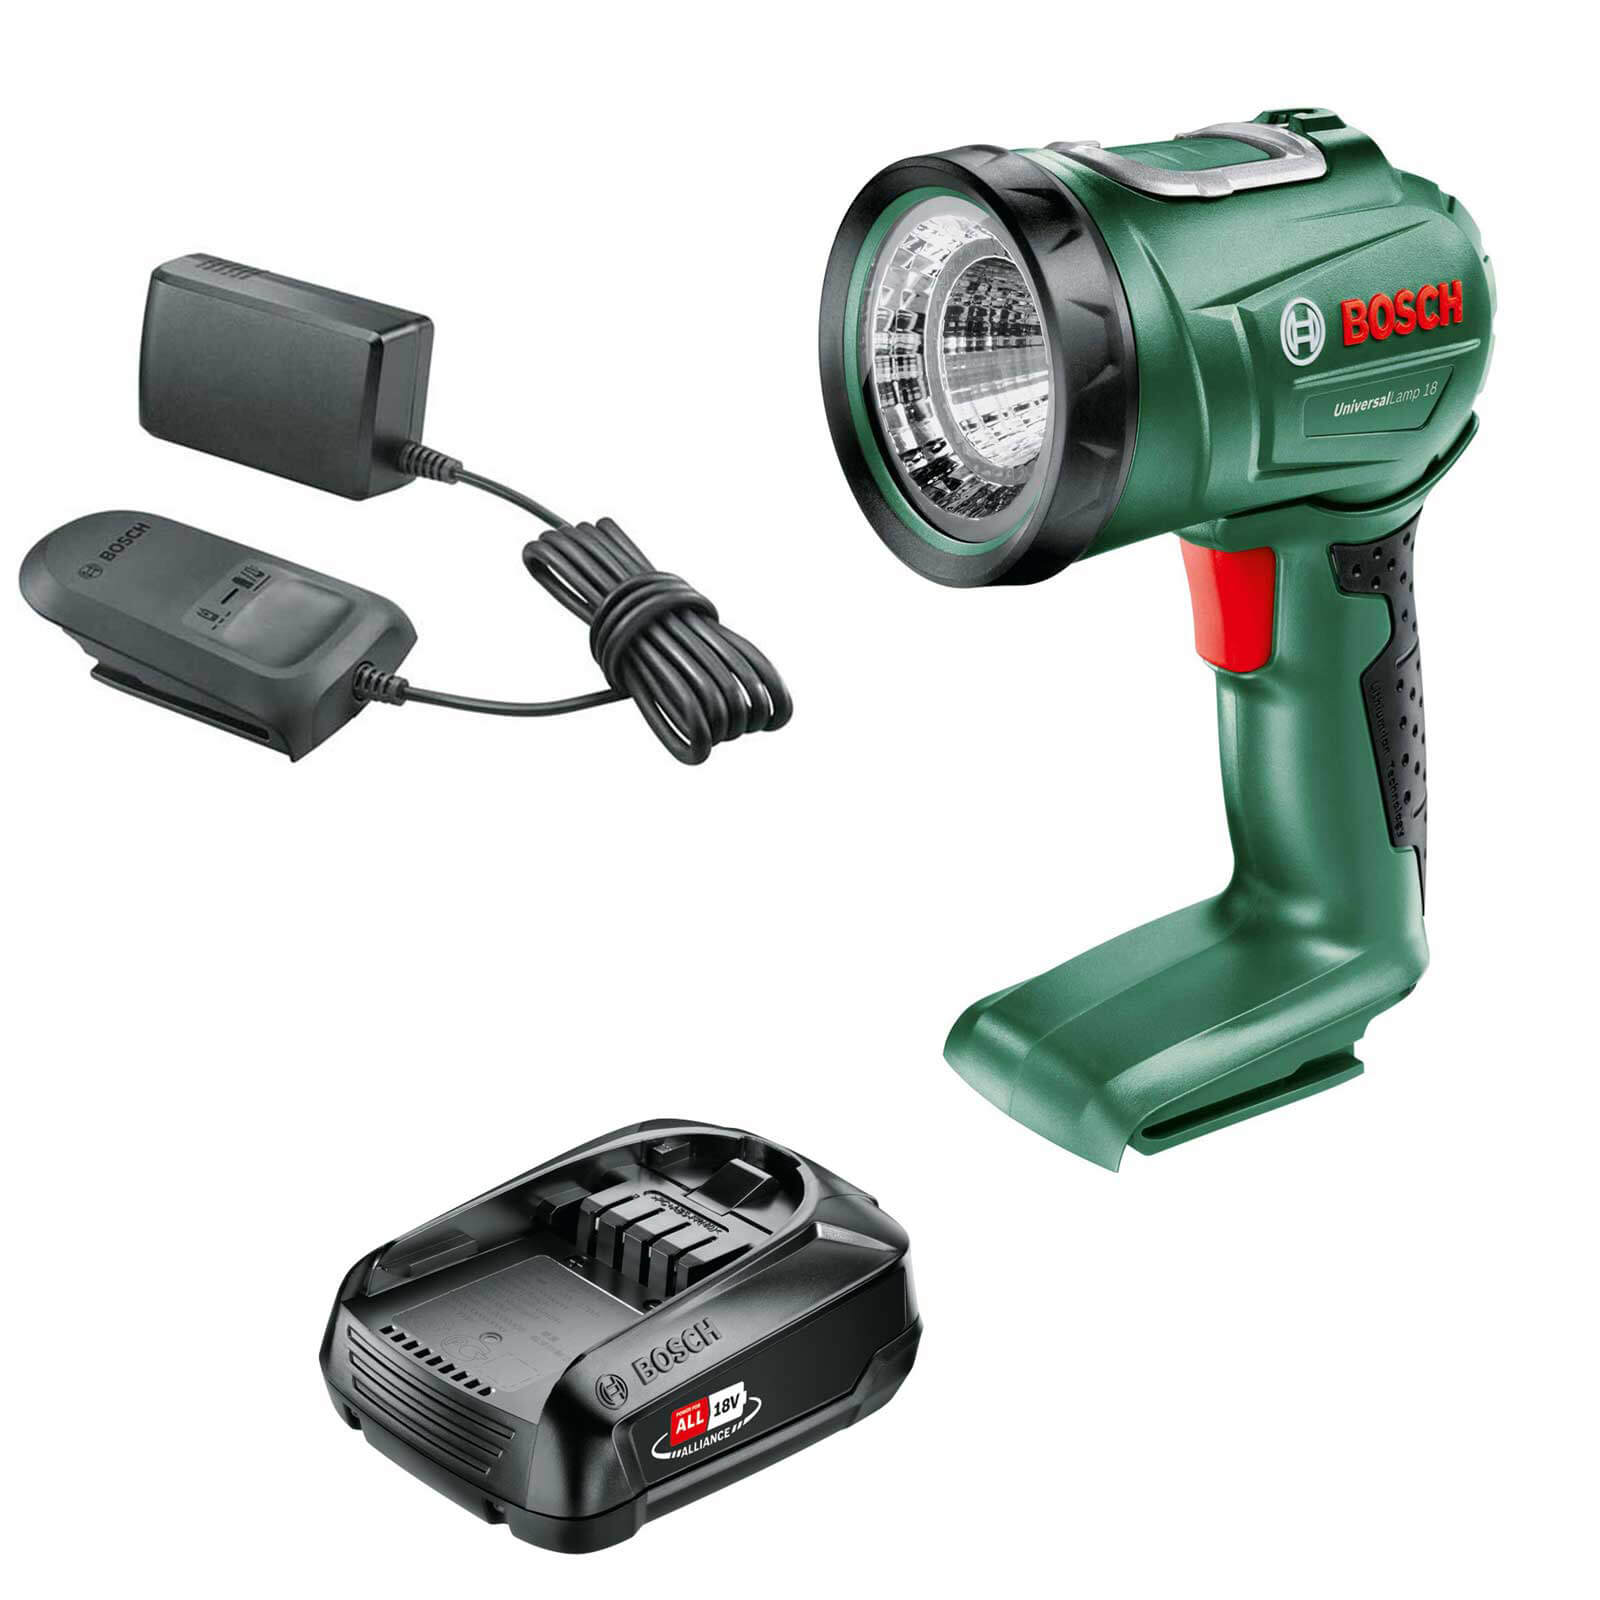 Image of Bosch UNIVERSALLAMP 18v Cordless Worklight 1 x 1.5ah Li-ion Charger No Case